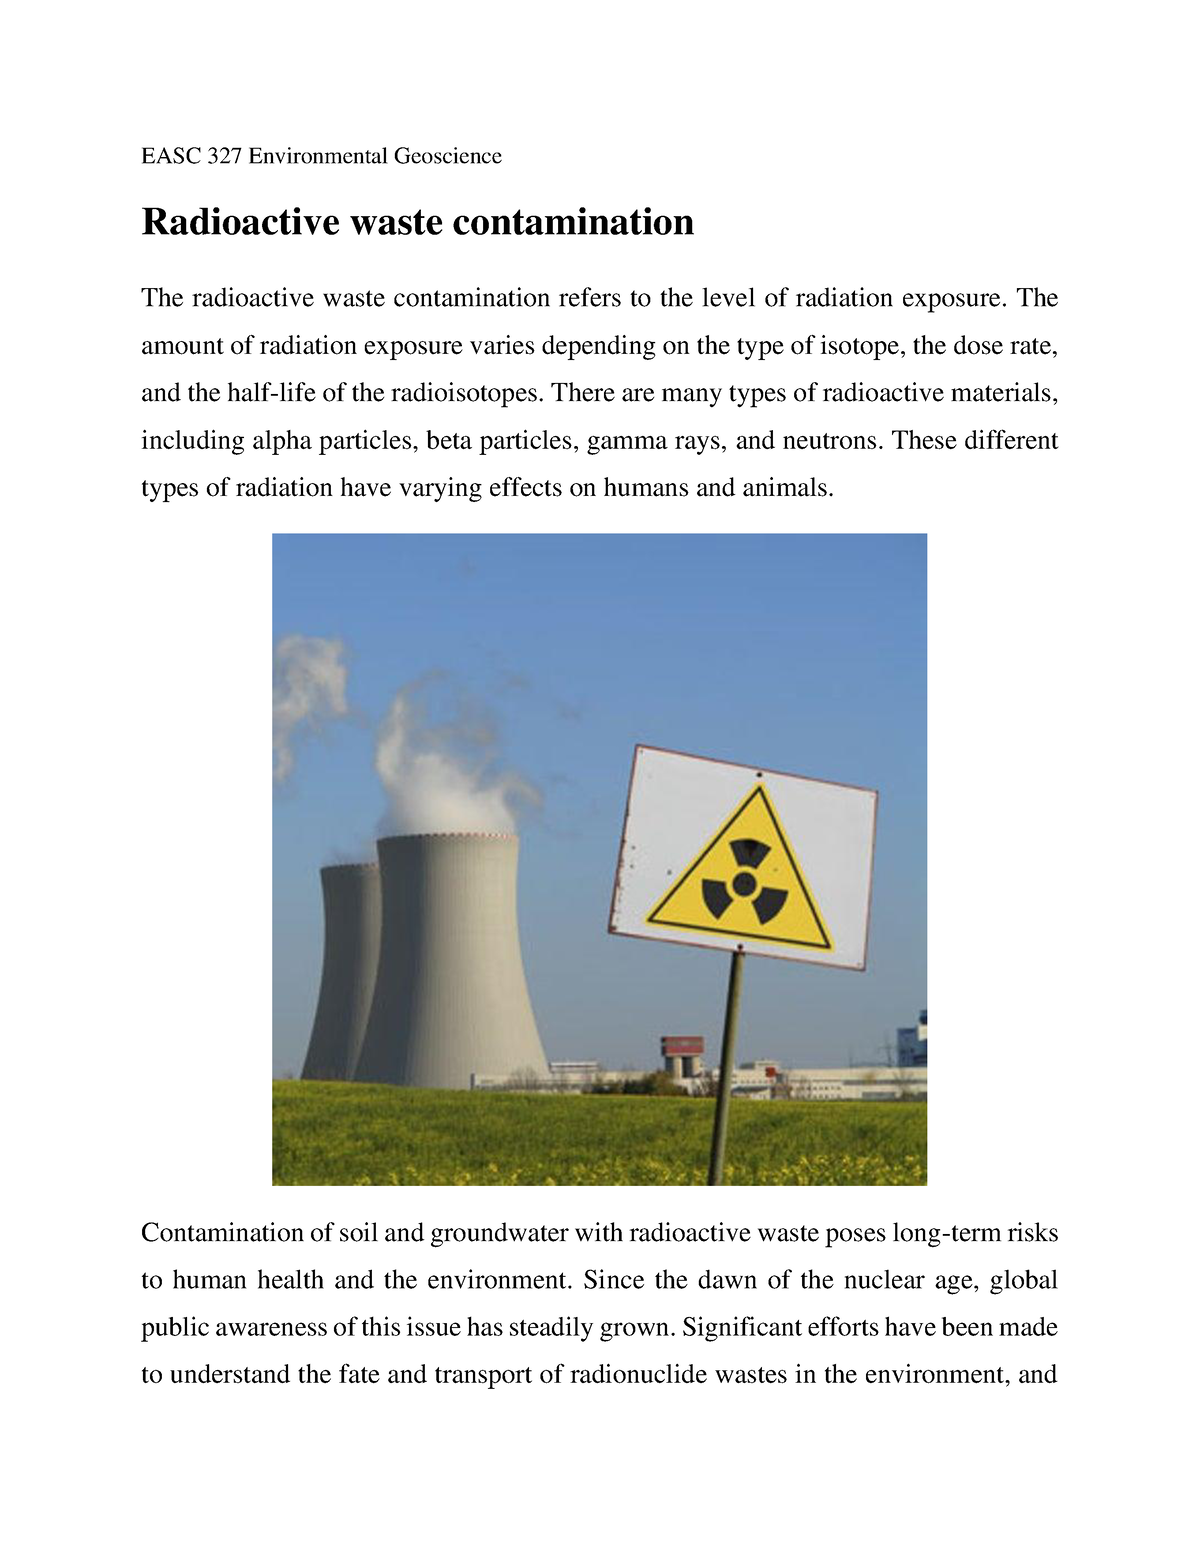 effects of radioactive pollution on animals